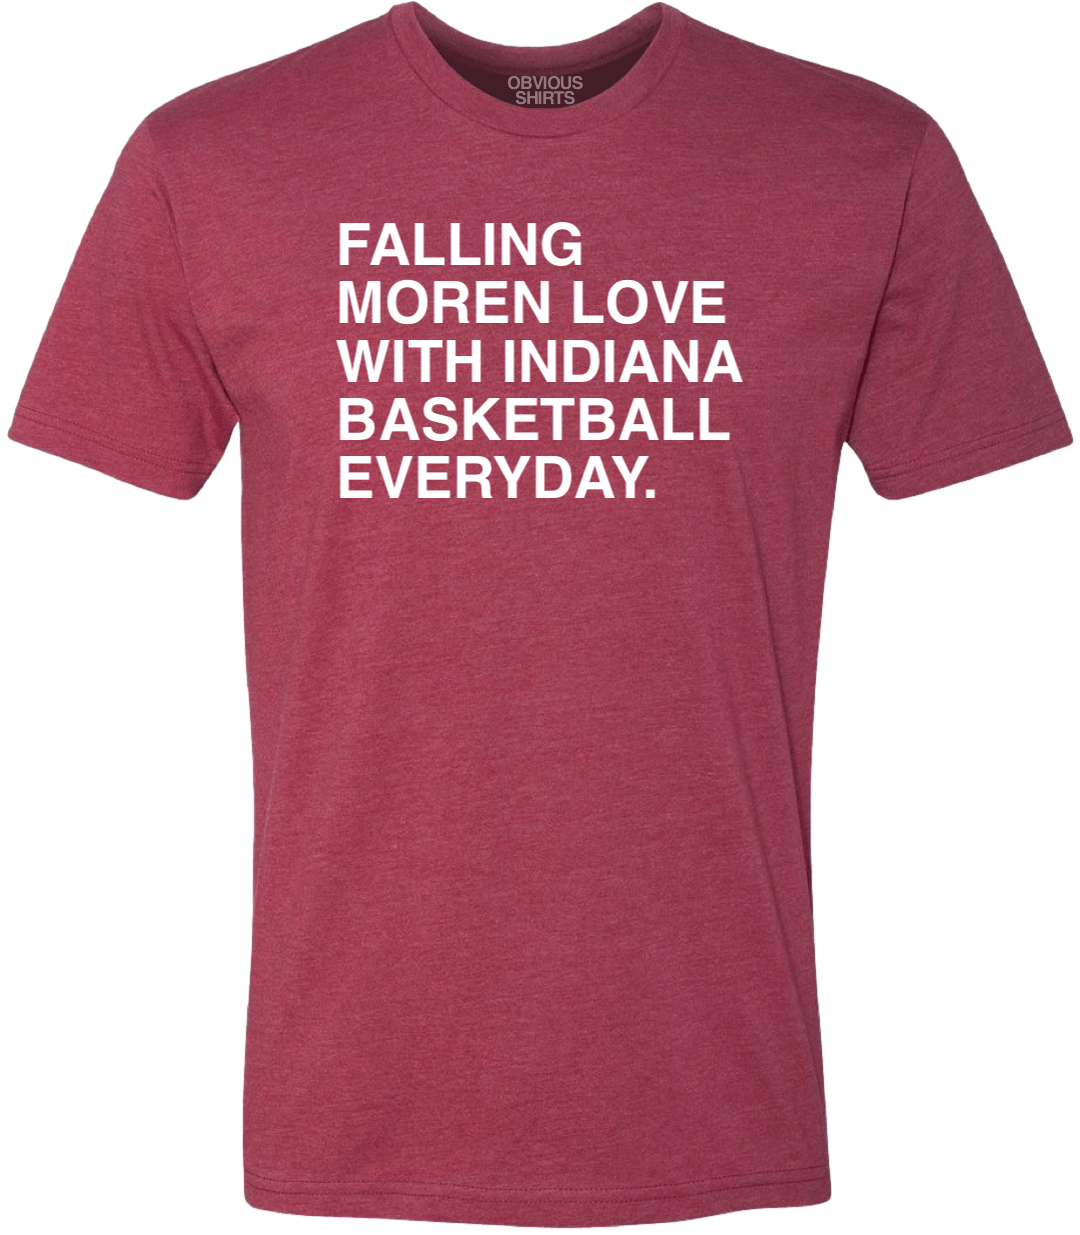 FALLING MOREN LOVE WITH INDIANA BASKETBALL. - OBVIOUS SHIRTS